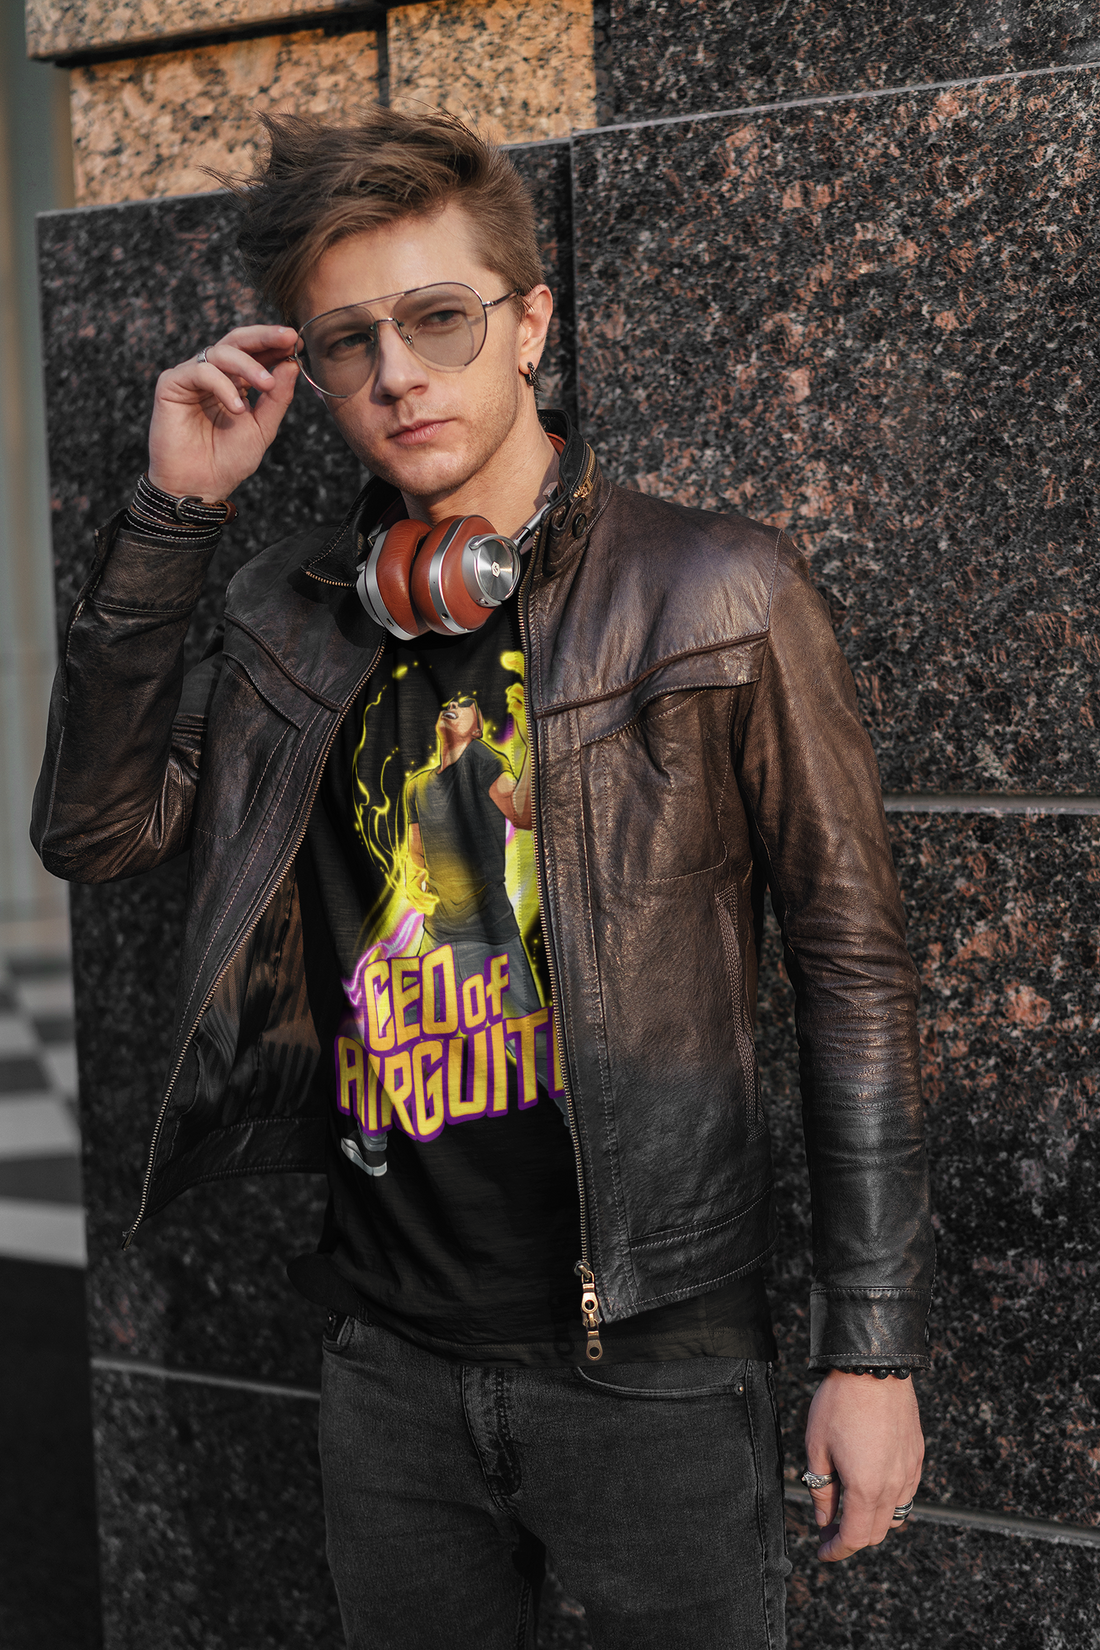 A male wearing a black T-shirt with the text "CEO of air guitar". It has an image of a male playing air guitar and creating magic.